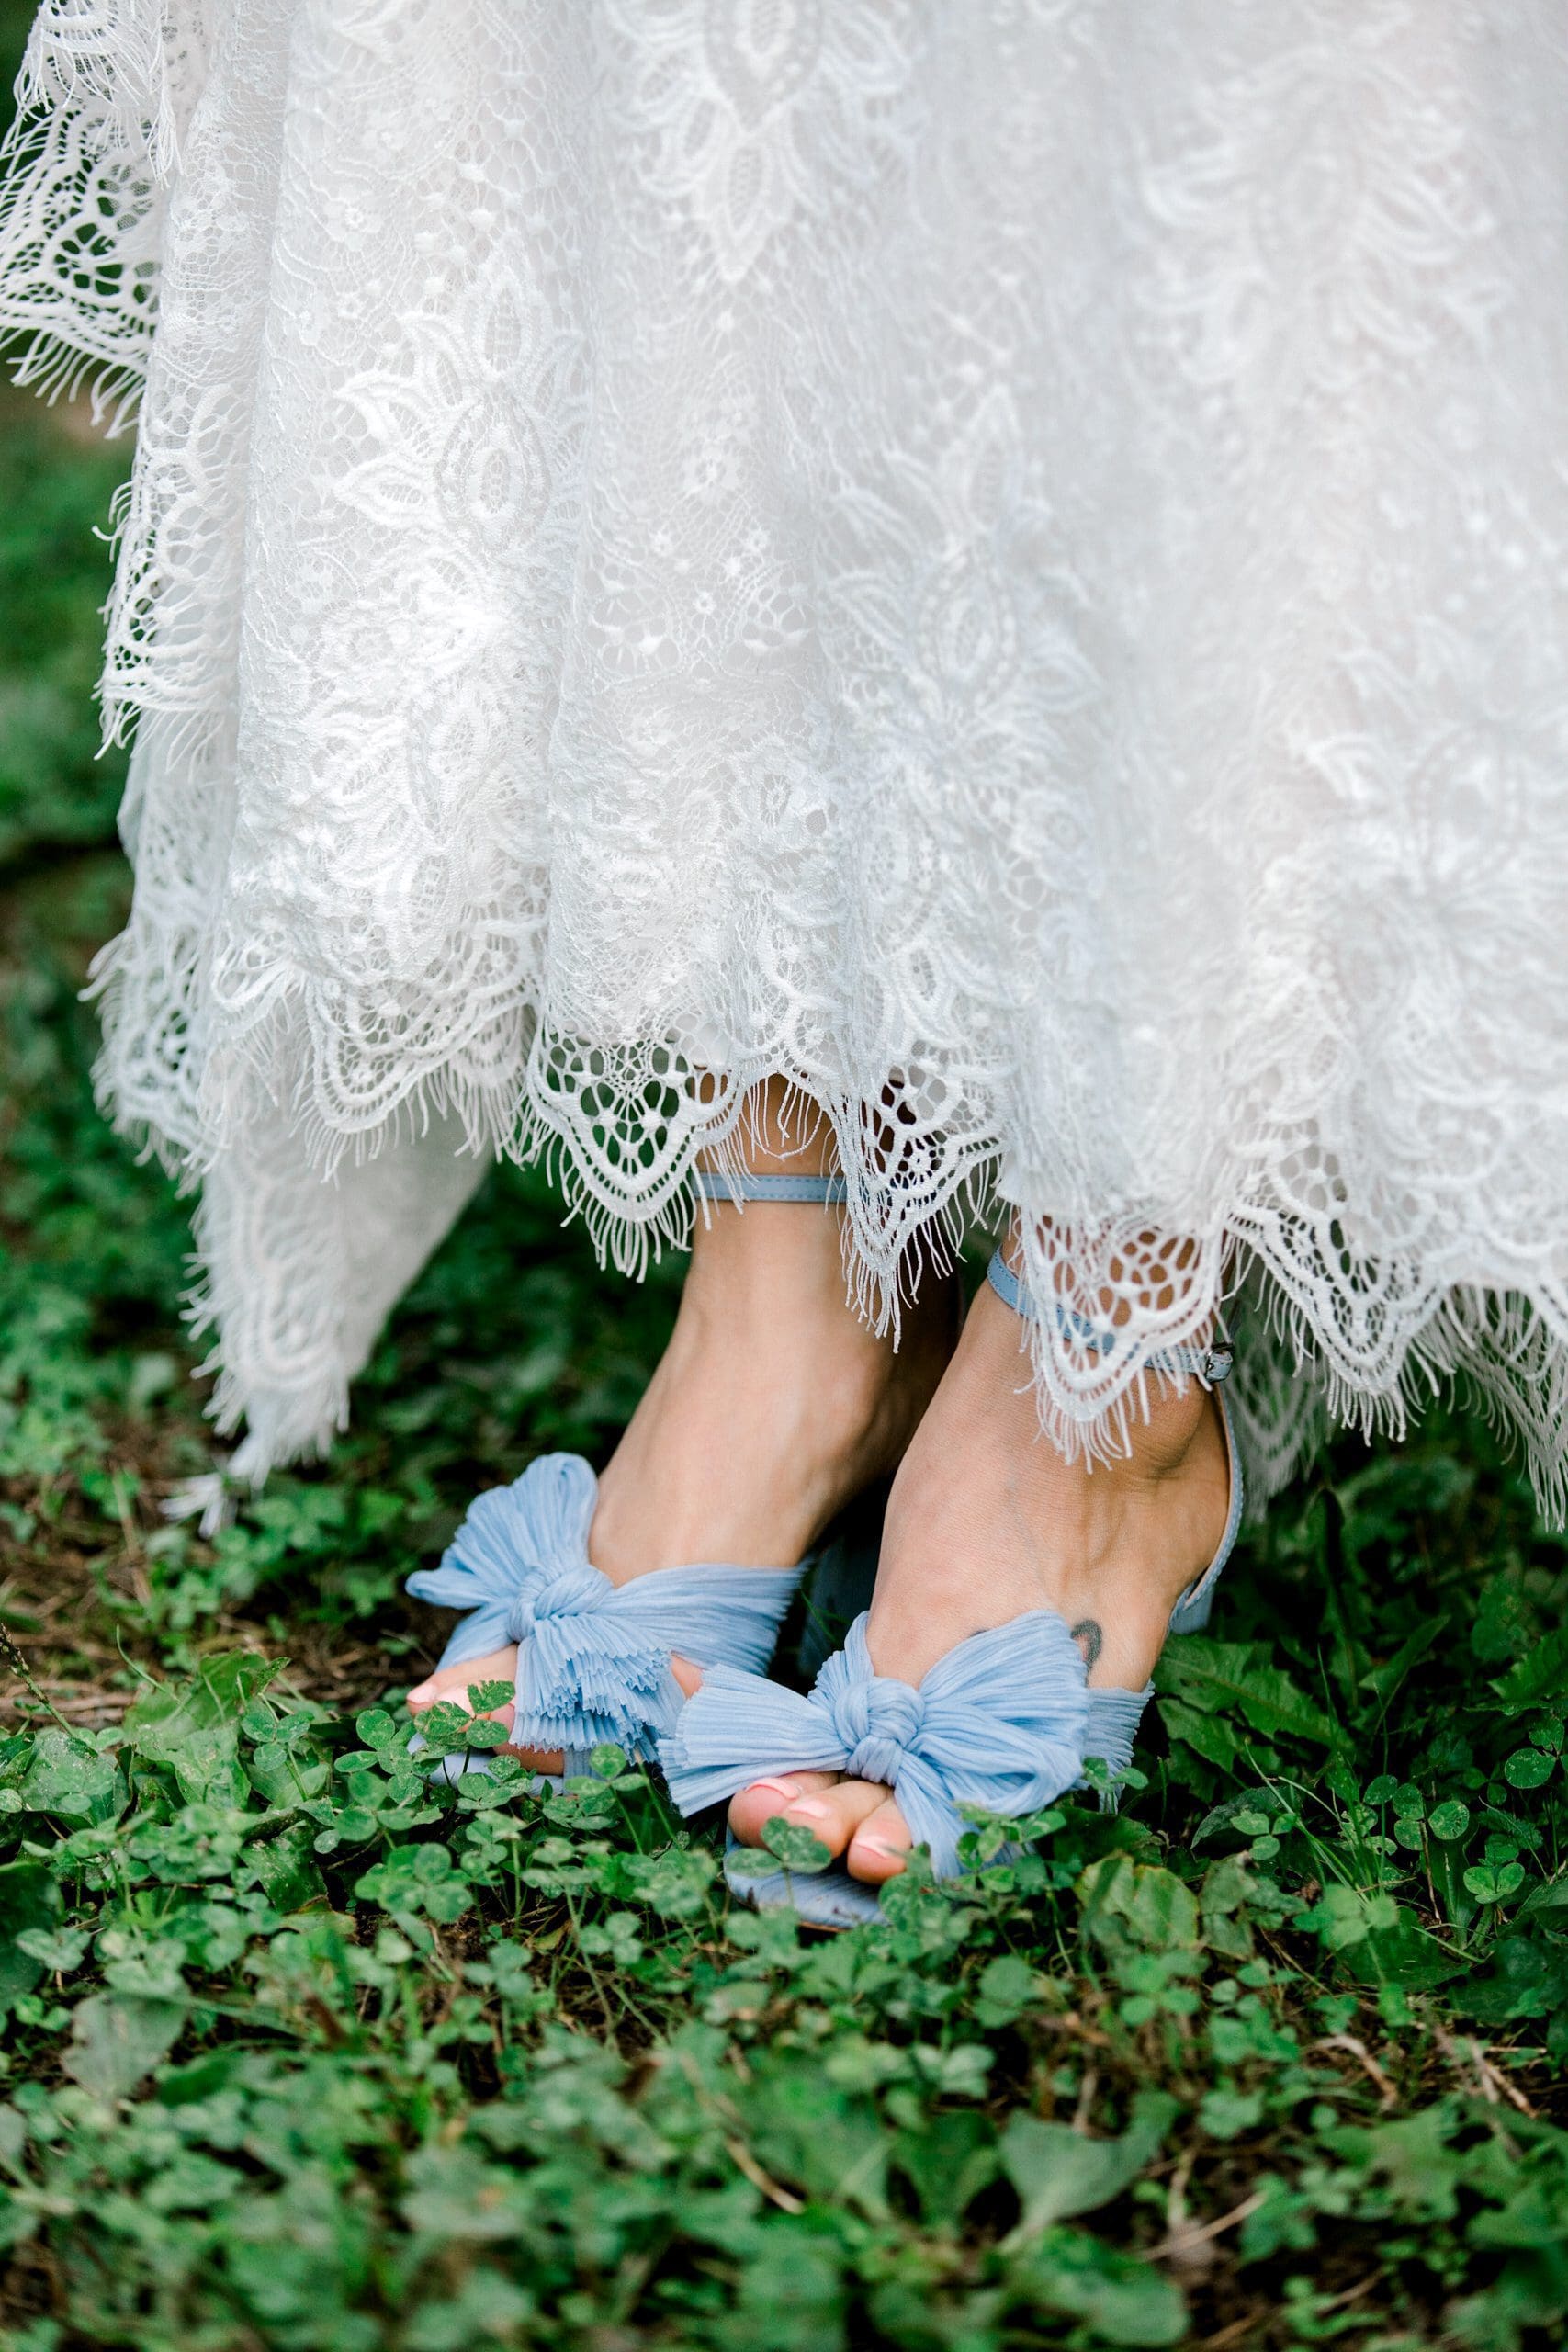 A close up detail photo of the bride's lace gown with blue bows on her shoes | Kathy Beaver Photography | Asheville Wedding Photographer